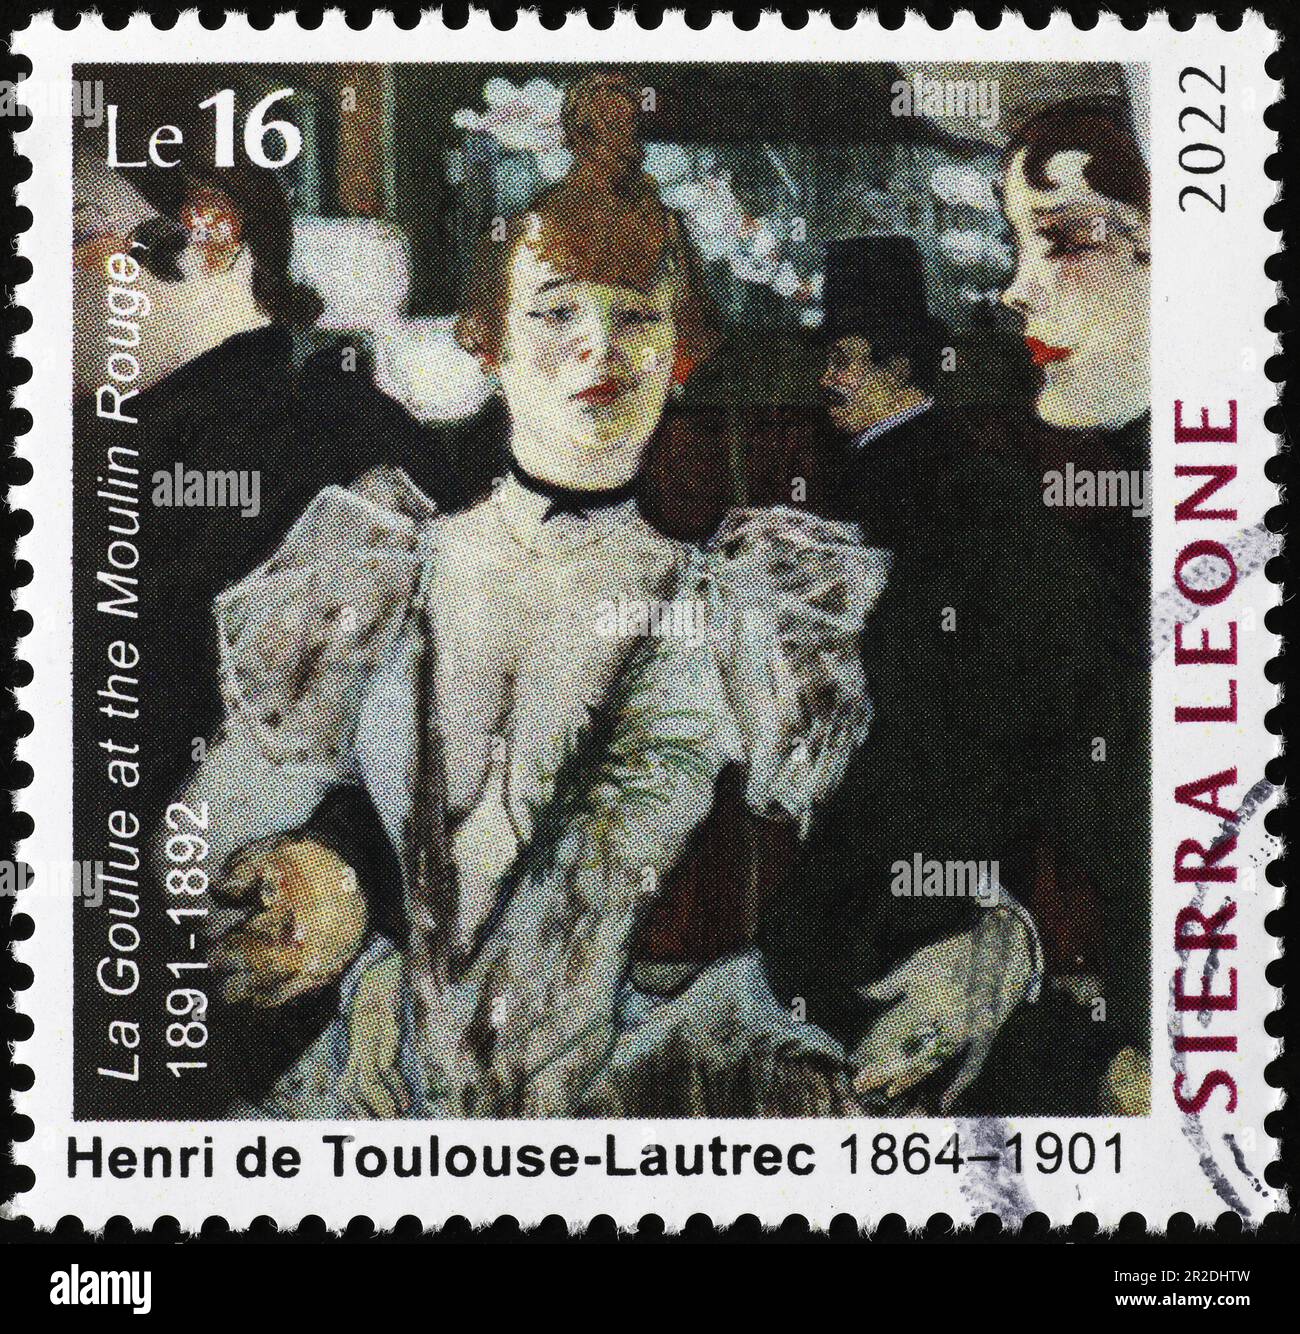 La goulue at the moulin rouge by Toulouse-Lautrec on postage stamp Stock Photo